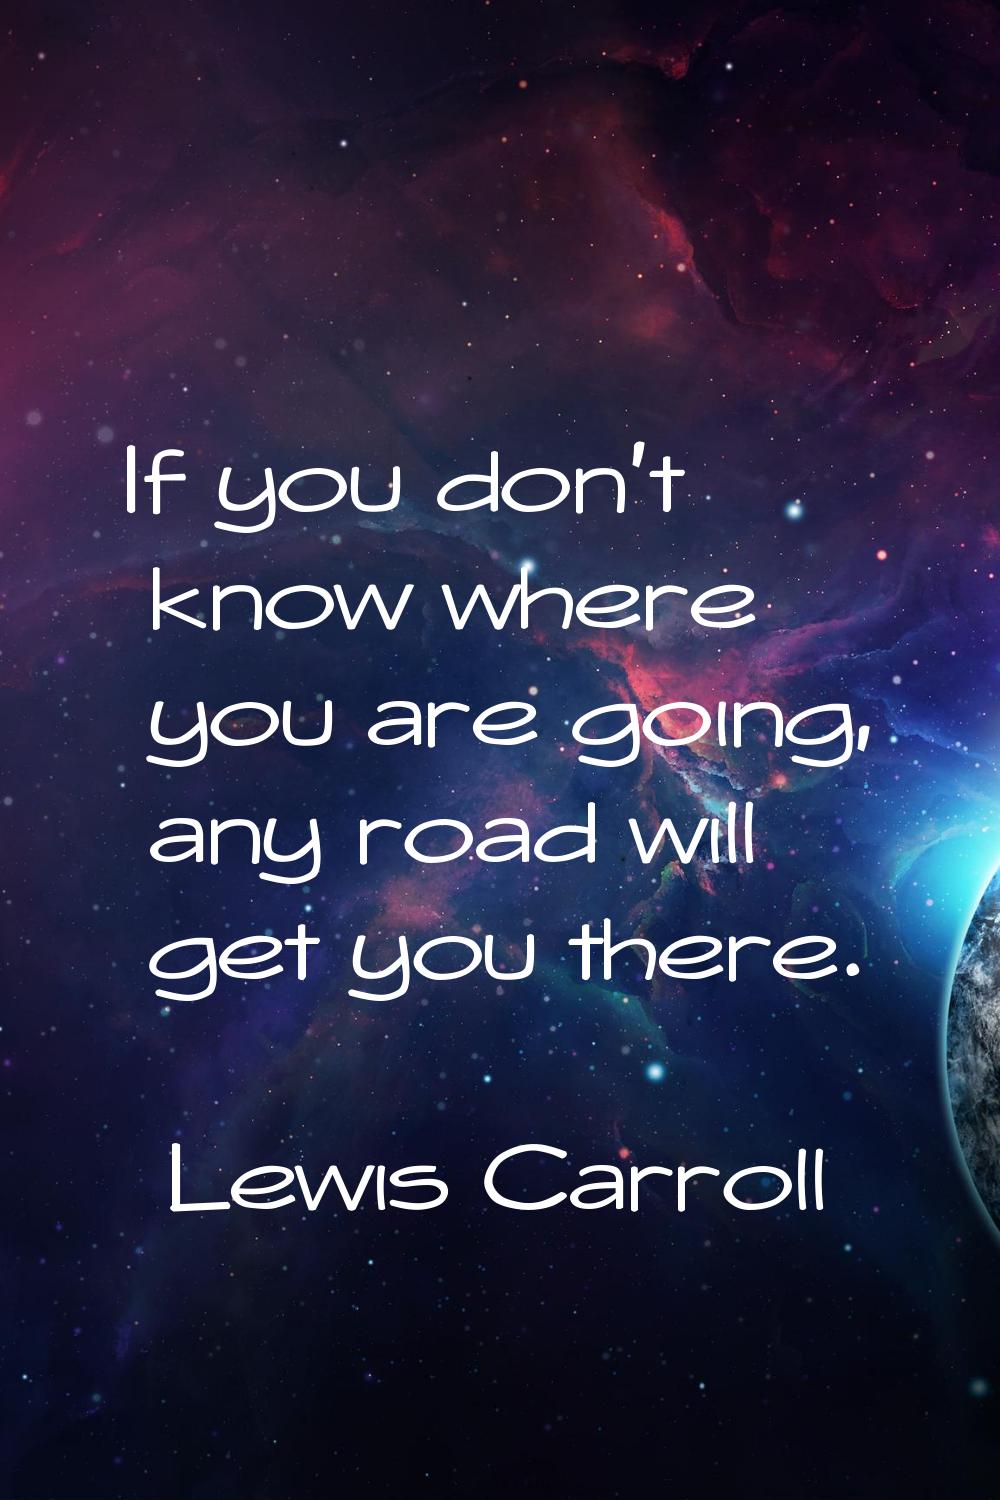 If you don't know where you are going, any road will get you there.